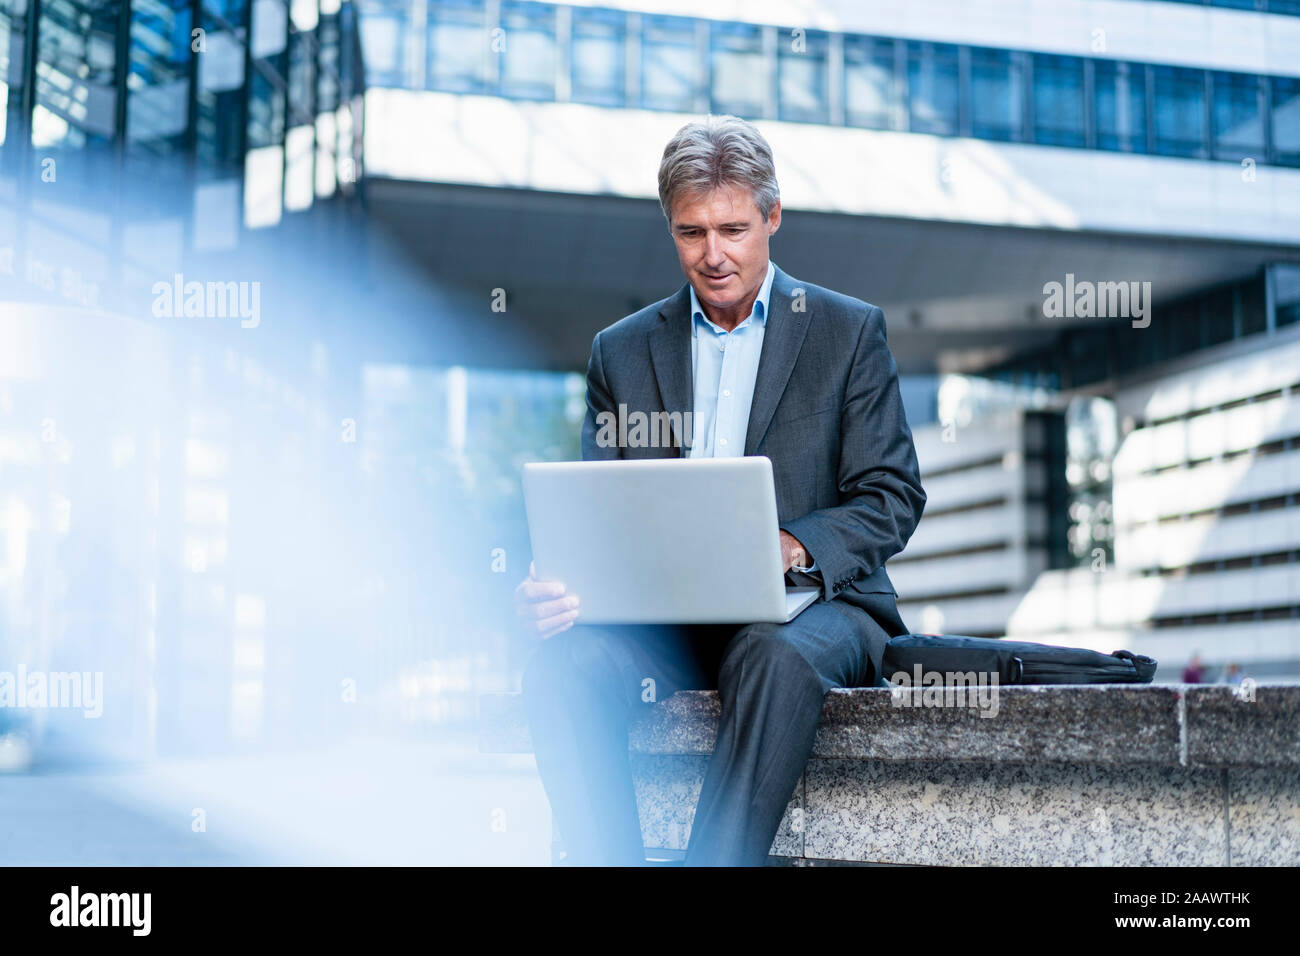 Mature businessman using laptop in the city Stock Photo